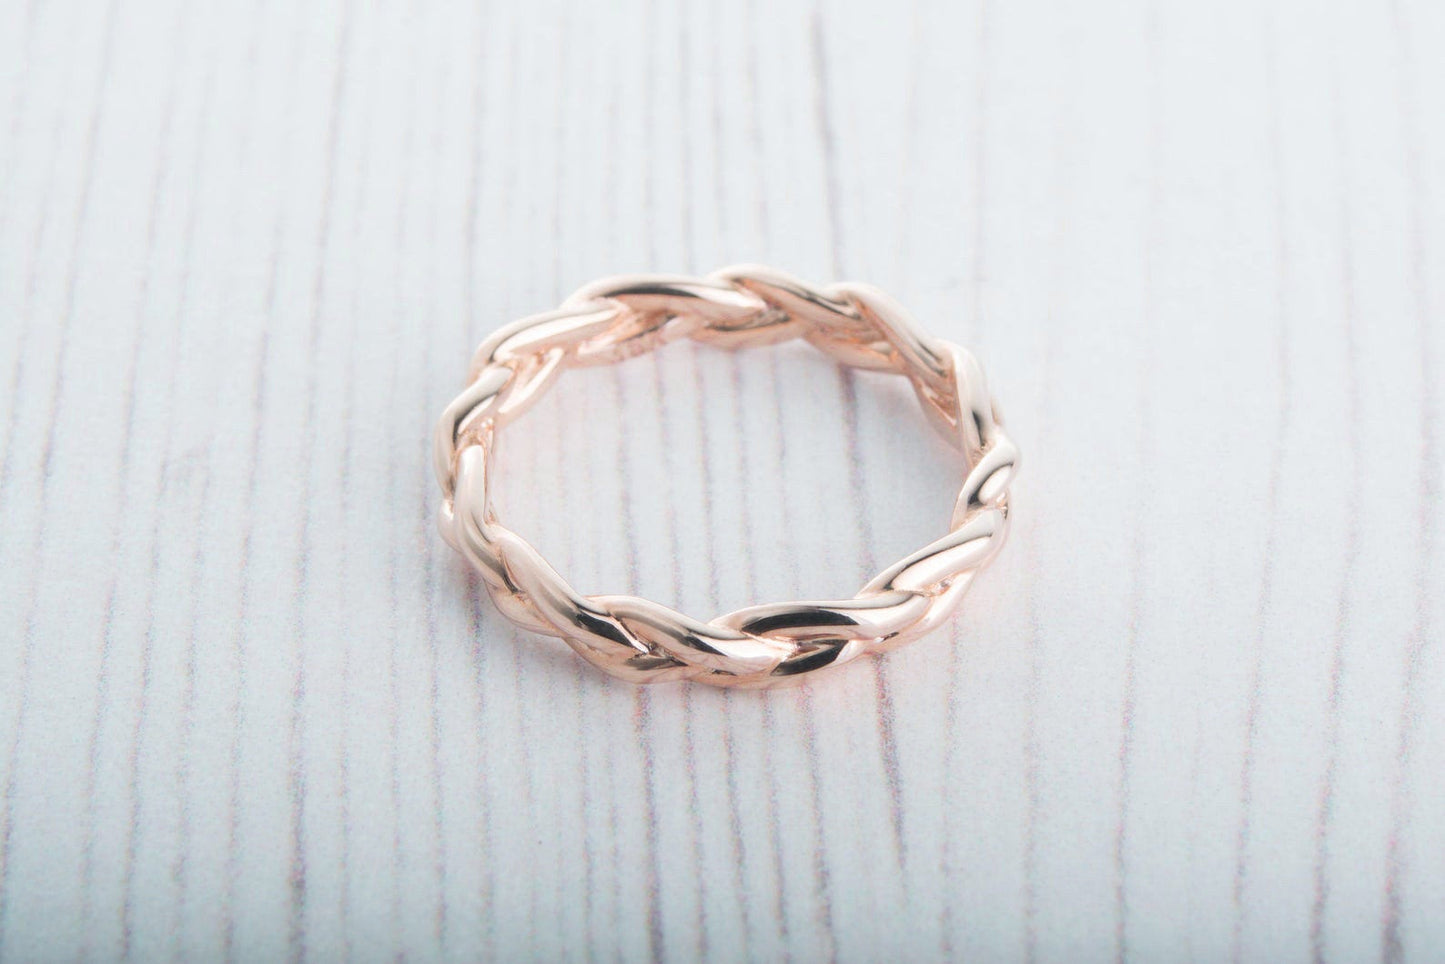 3mm Wide Braided Weave Ring in Rose Gold Filled  - wedding ring - wedding band - promise ring